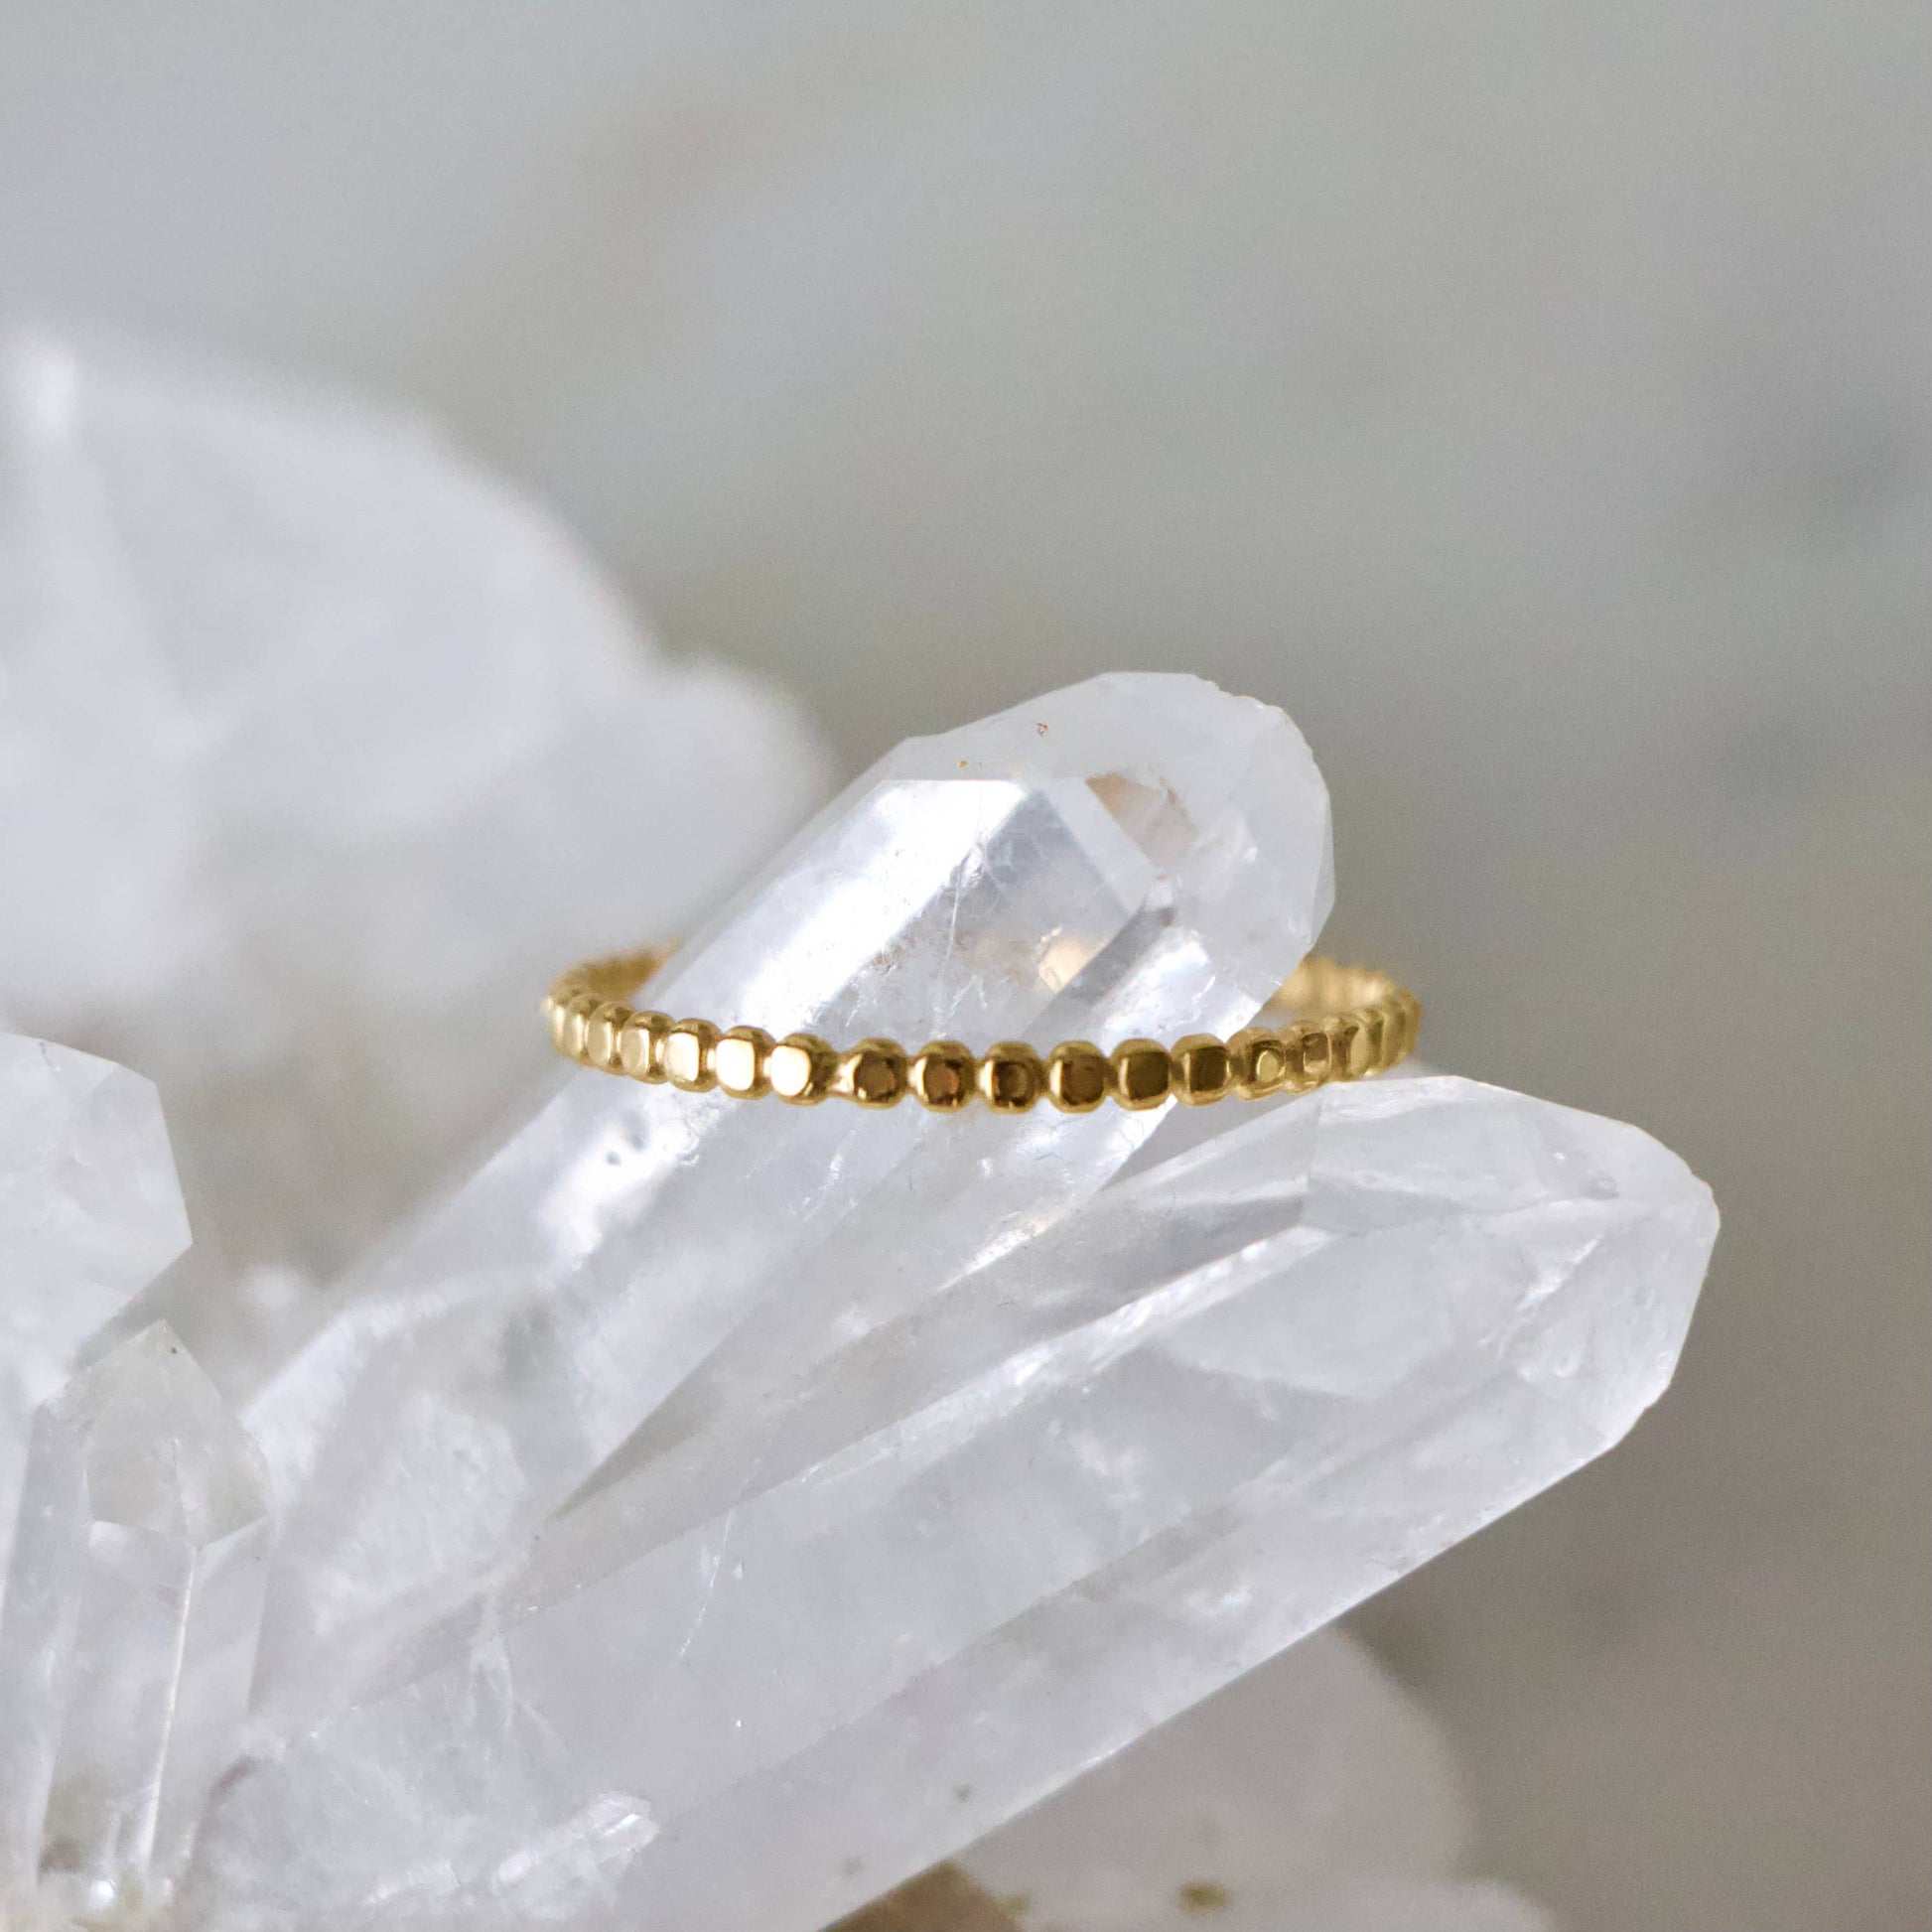 Dot Stack Ring -  Tarnish Free: US 6 - Storm and Sky Shoppe